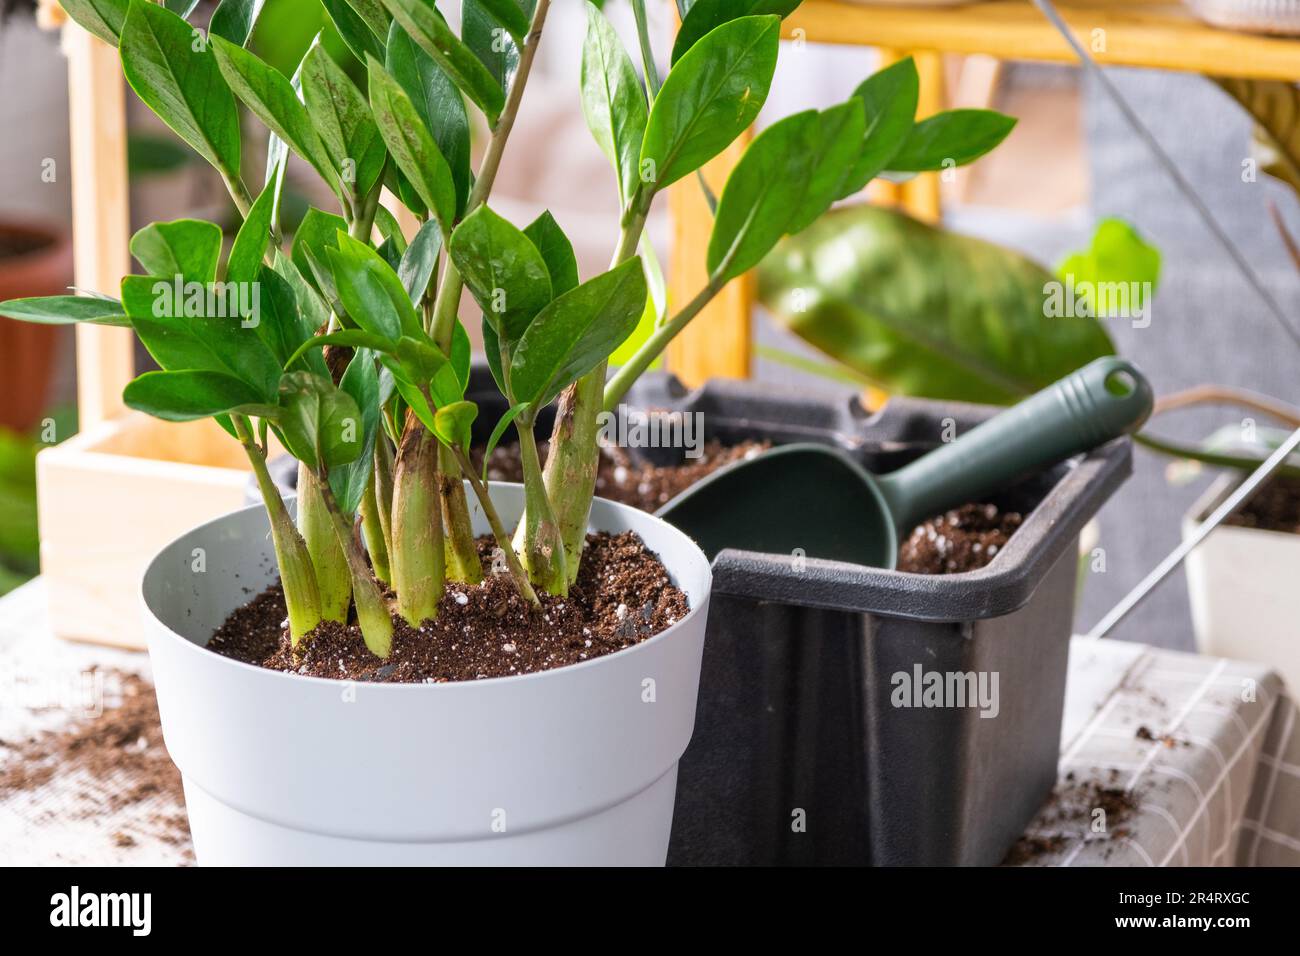 Repotting a home plant succulent zamiokulkas into new pot. Caring for a potted plant, layout on table with soil, shovel, ornamental flowerpot Stock Photo